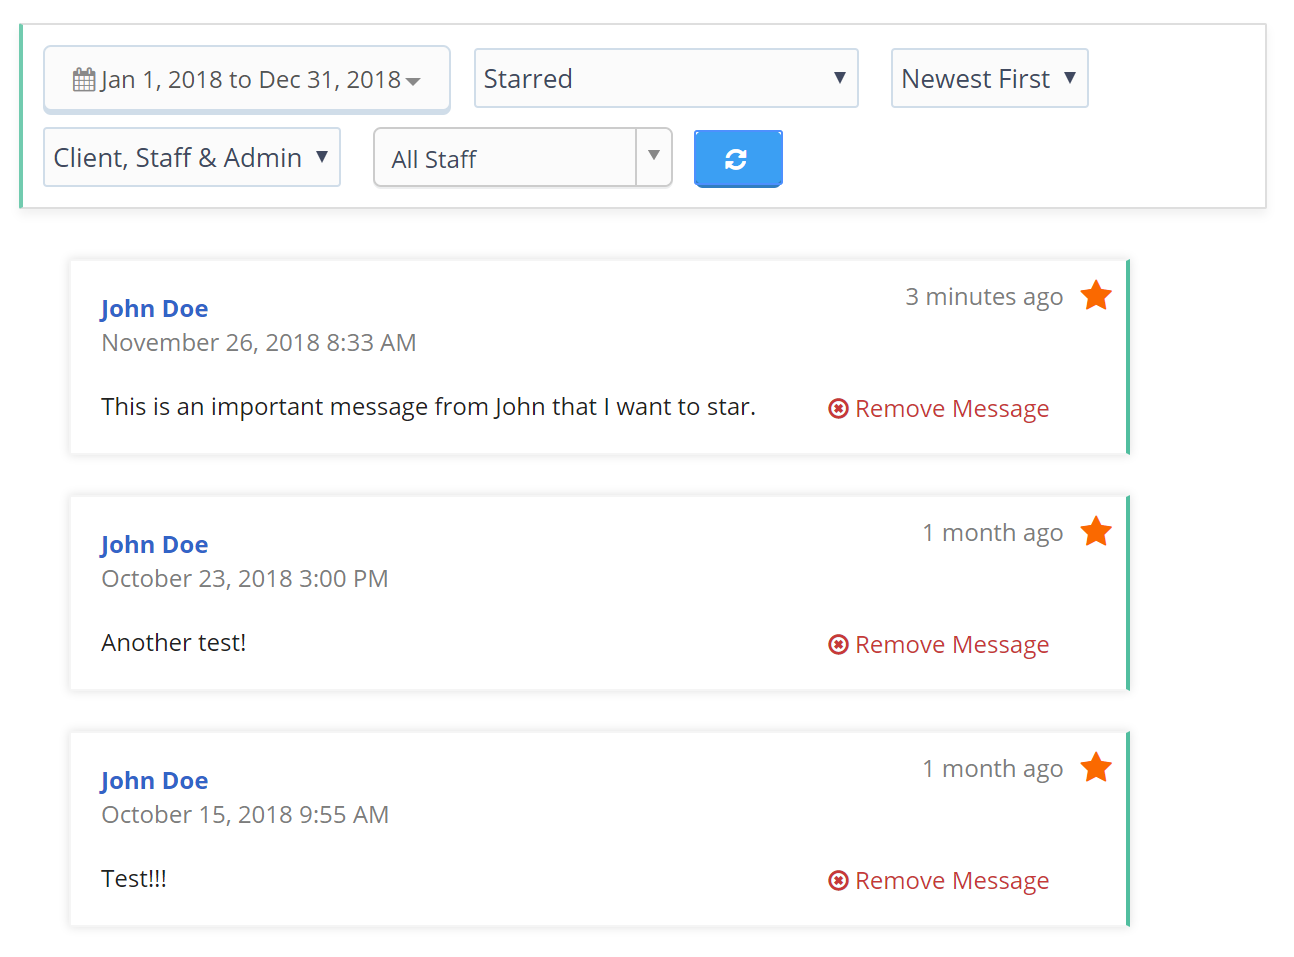 Viewing Messages Filtered by Star in Client Conversation Feed